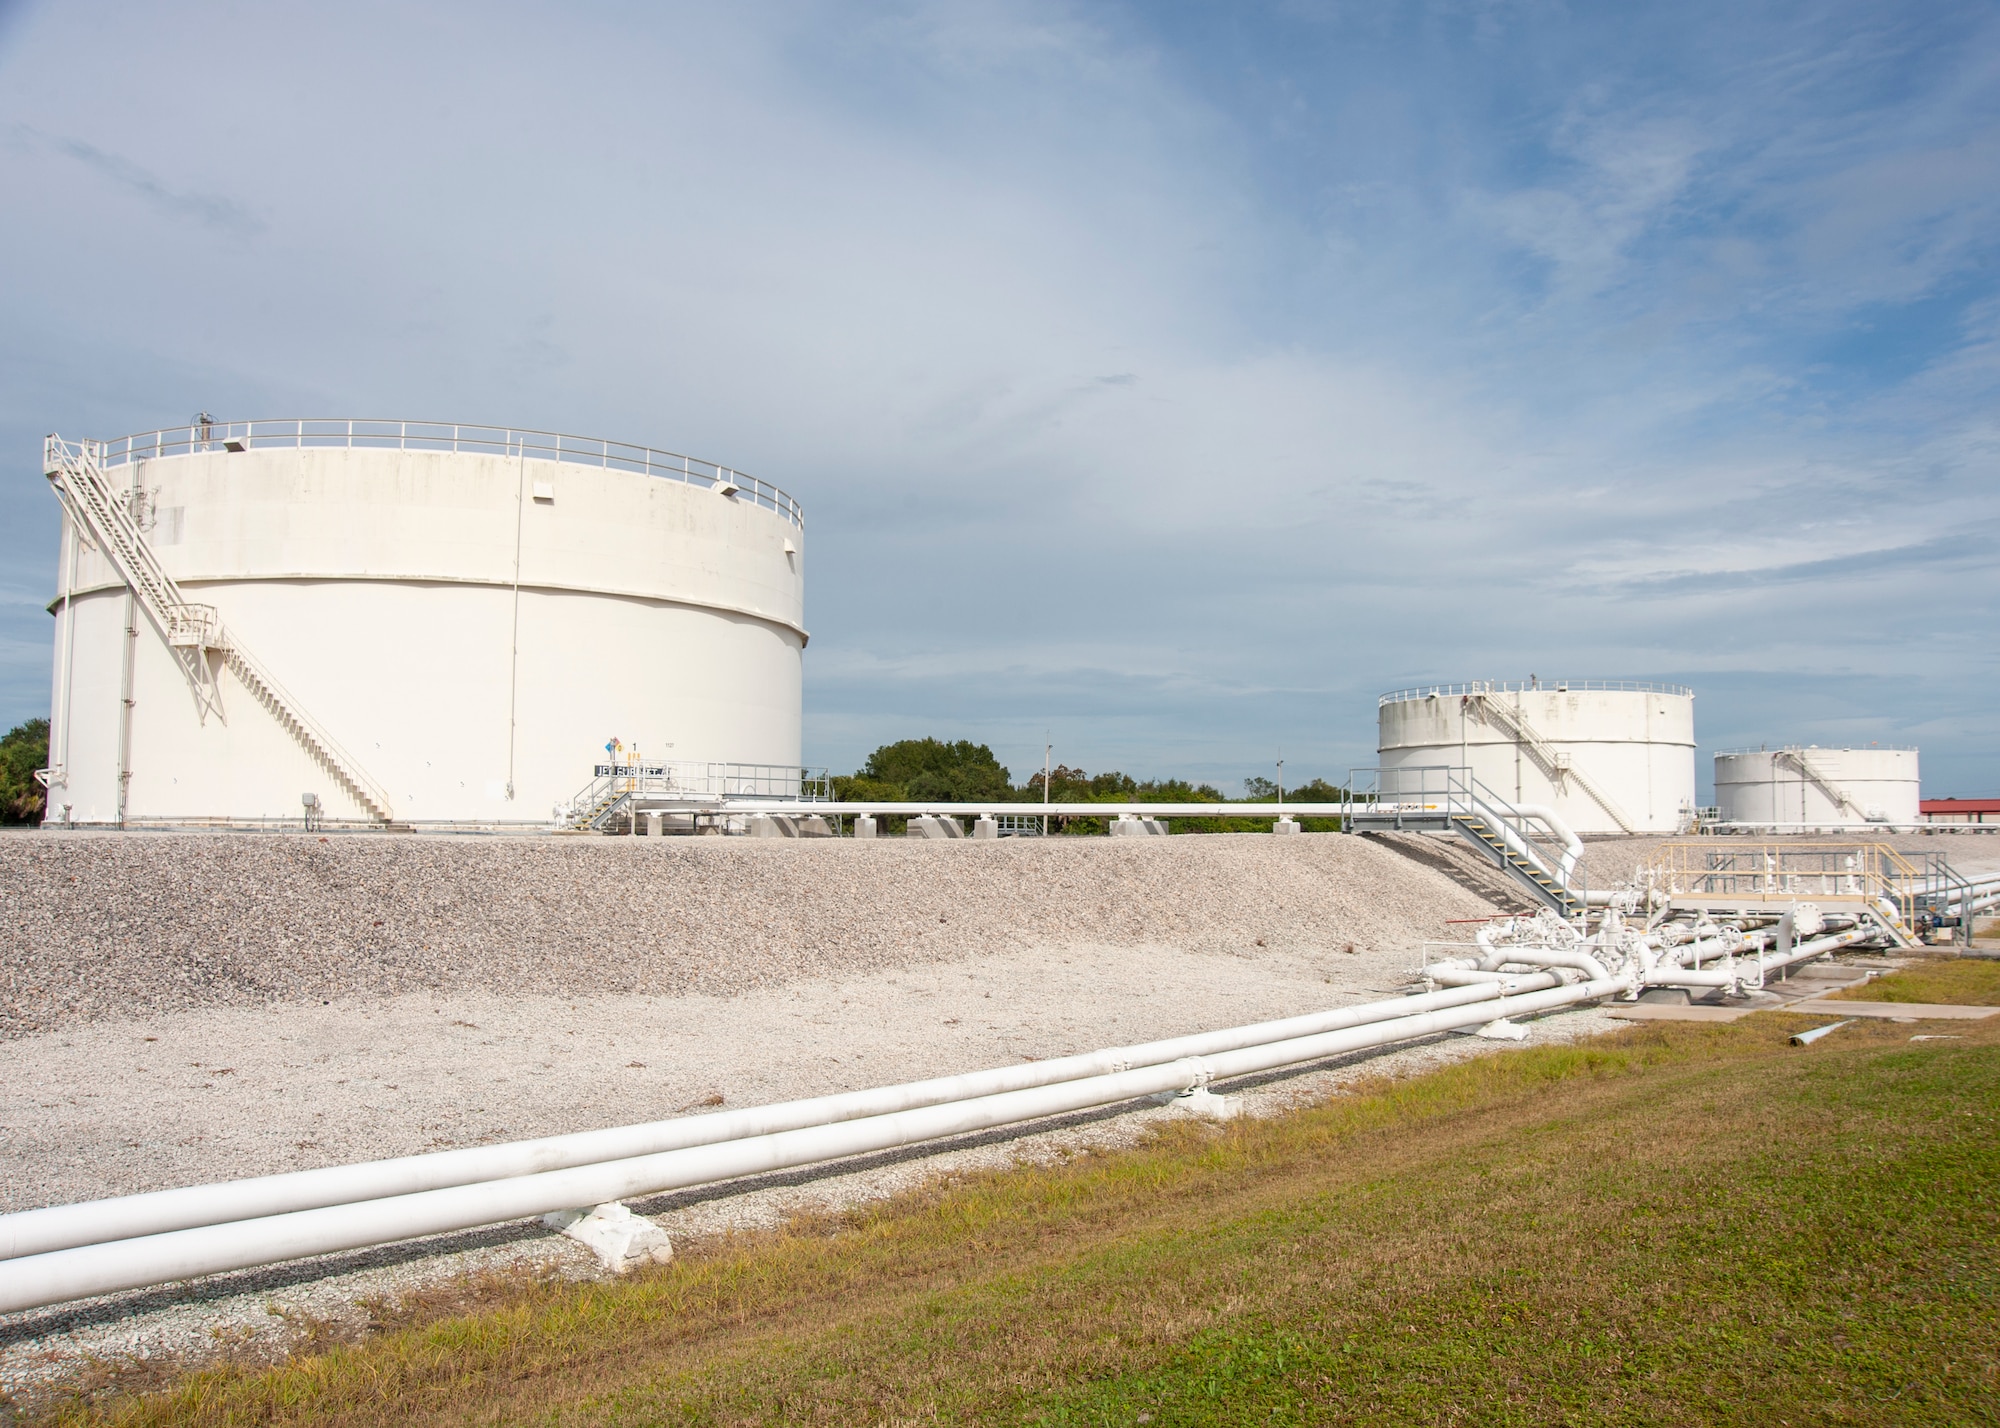 The defense fuel supply point is located on the far eastern side of MacDill Air Force Base, Fla. These tanks can store up to approximately 6,500,000 gallons of Jet Fuel A and the operators transfer around 350,000 gallons of fuel to use for KC-135 Stratotankers on MacDill AFB. (U.S. Air Force photo by Airman 1st Class David D. McLoney)